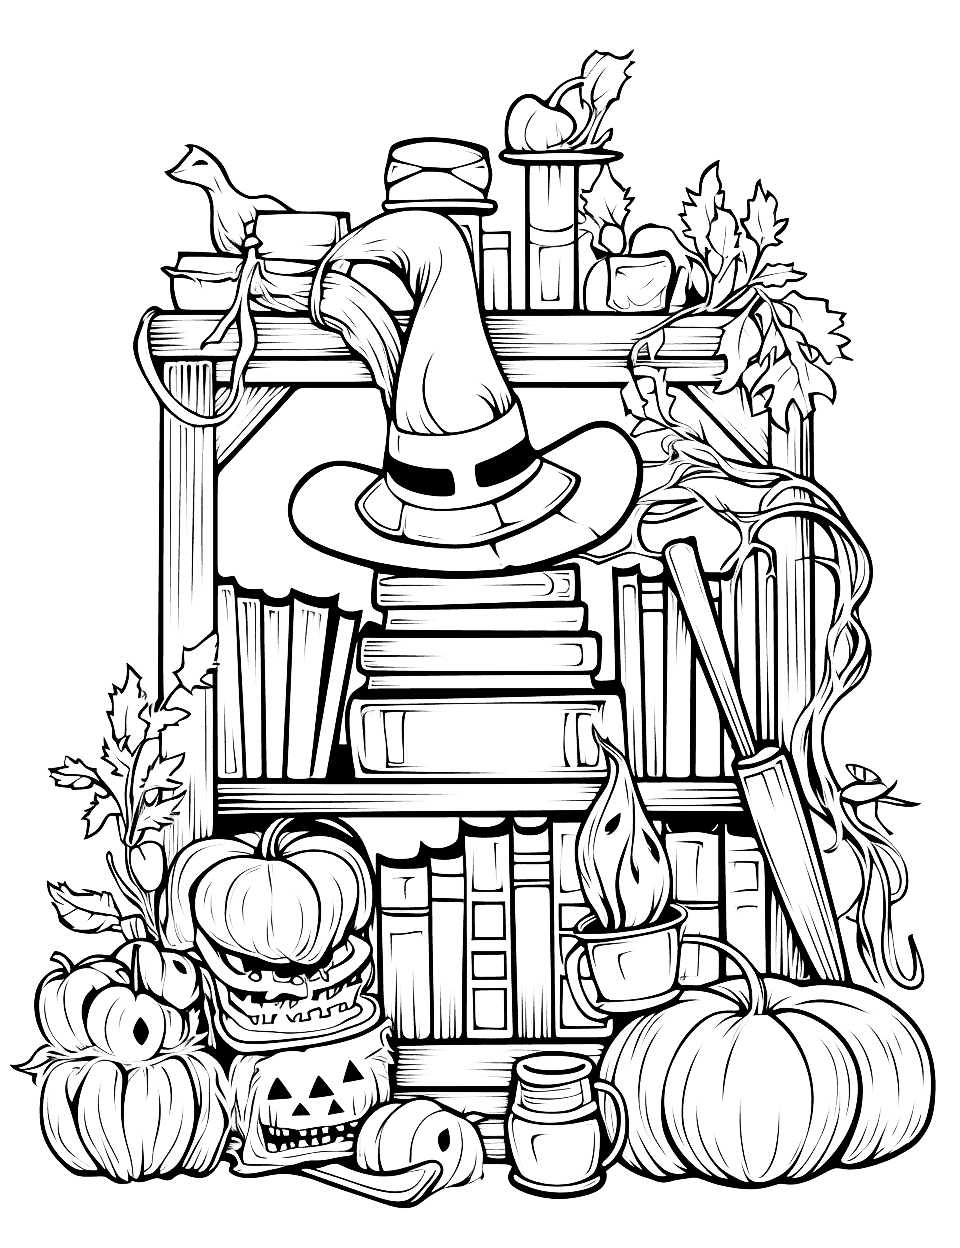 Witch's Library Halloween Coloring Page - A detailed library scene showing a witch’s collection of magical books, potions, and artifacts.